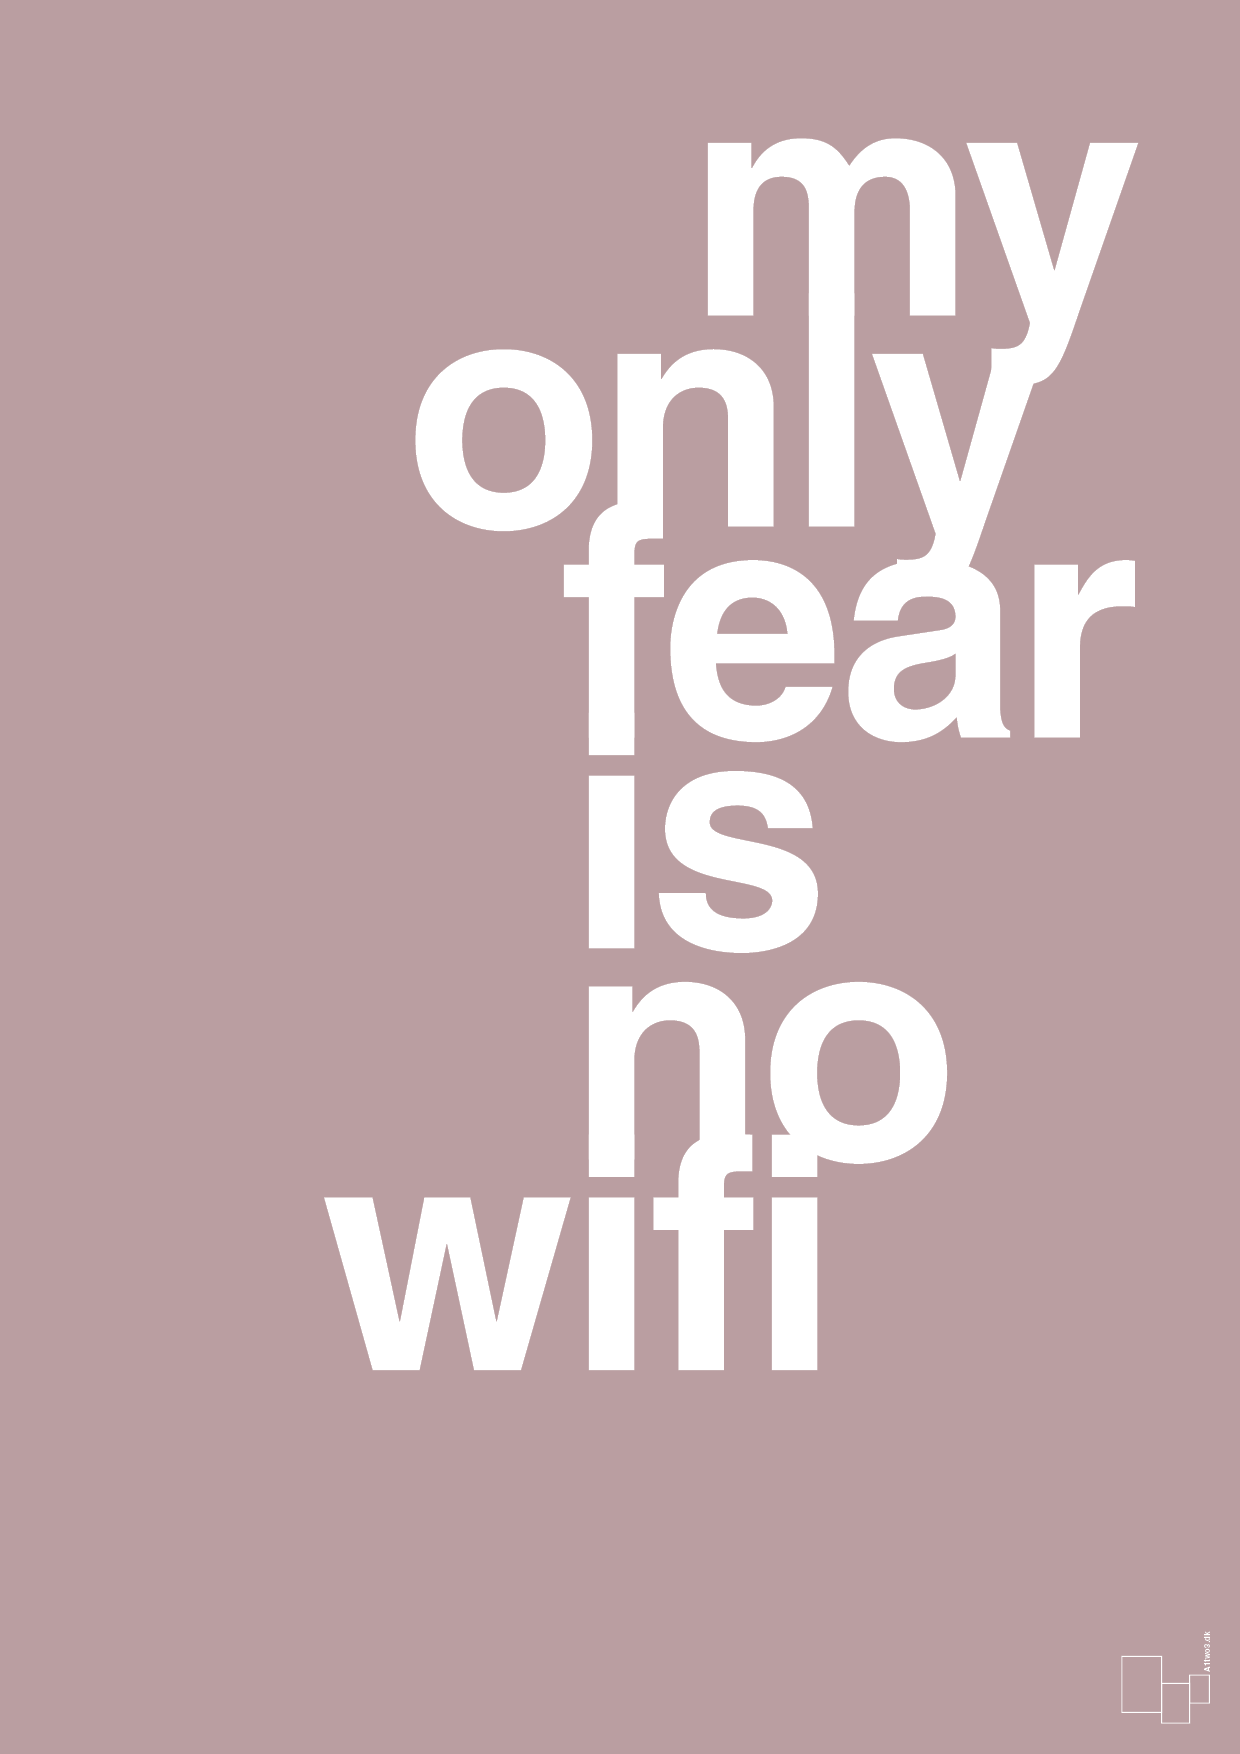 my only fear is no wifi - Plakat med Sport & Fritid i Light Rose